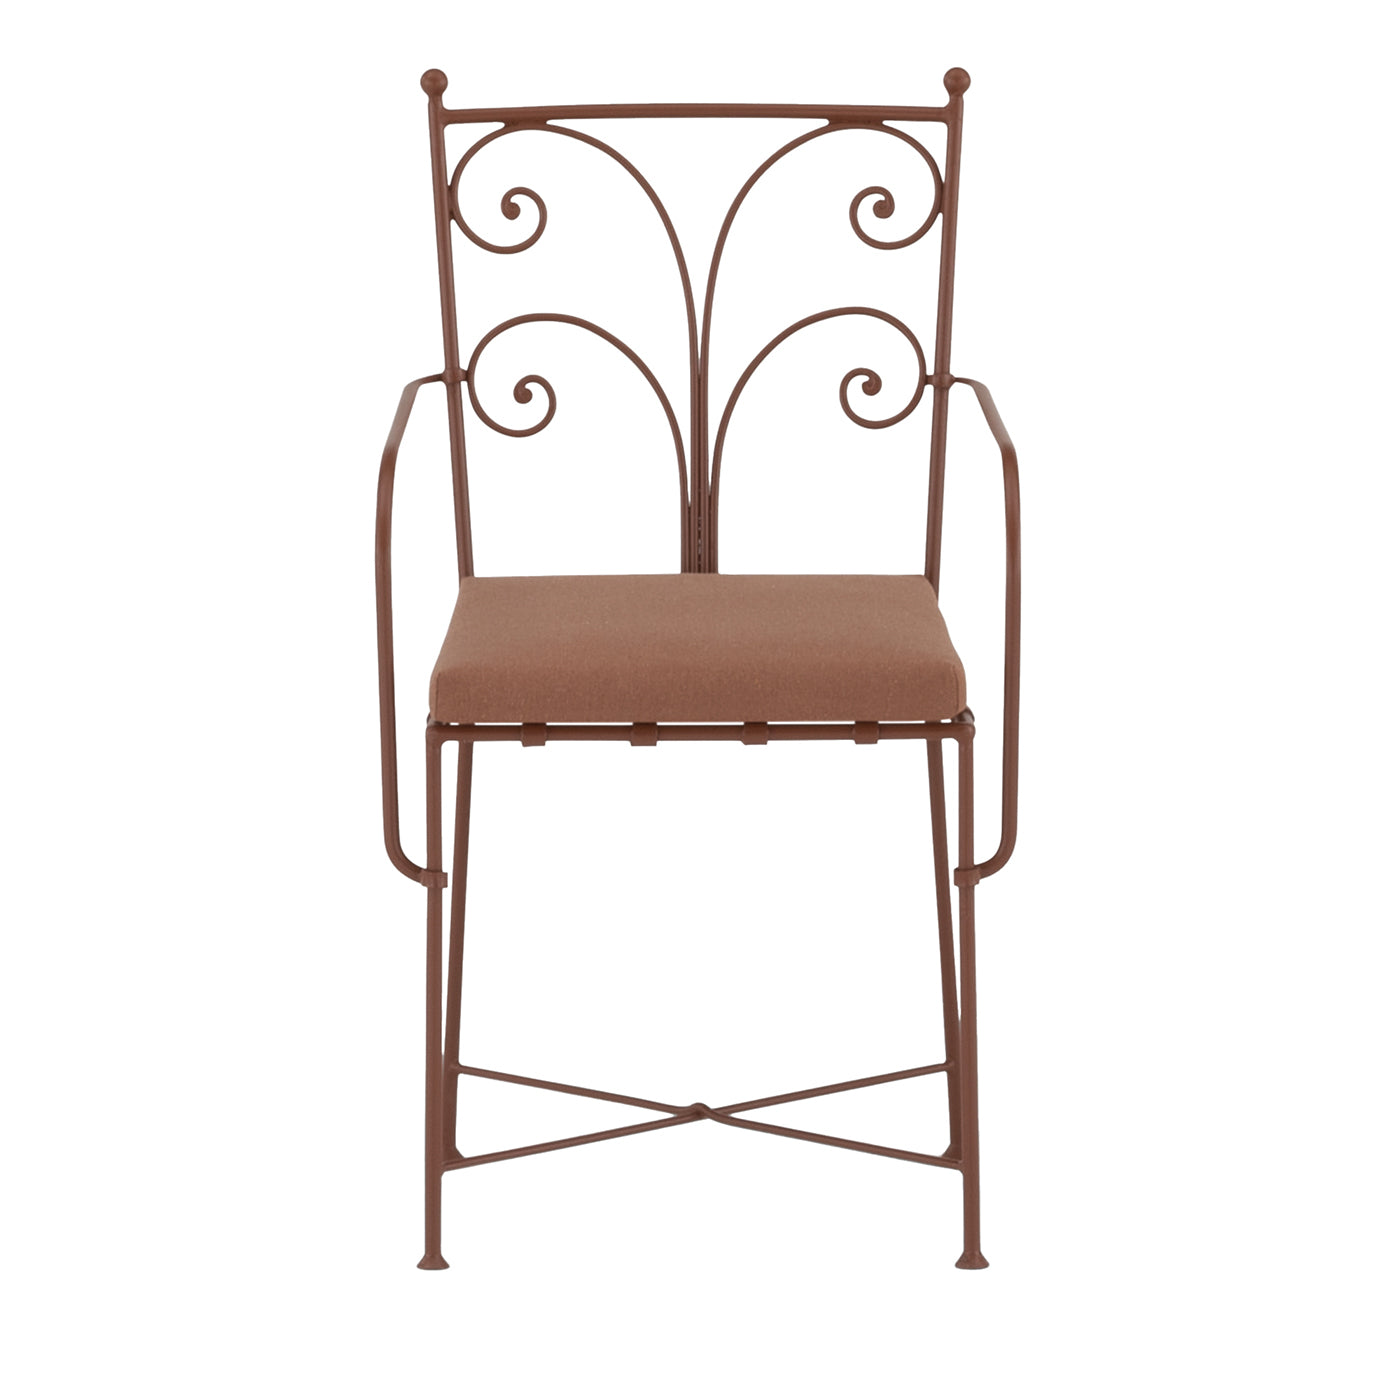 Acanta Wrought Iron Light-Brown Cushioned Chair With Armrests (Chaise à accoudoirs en fer forgé marron clair) - Vue principale